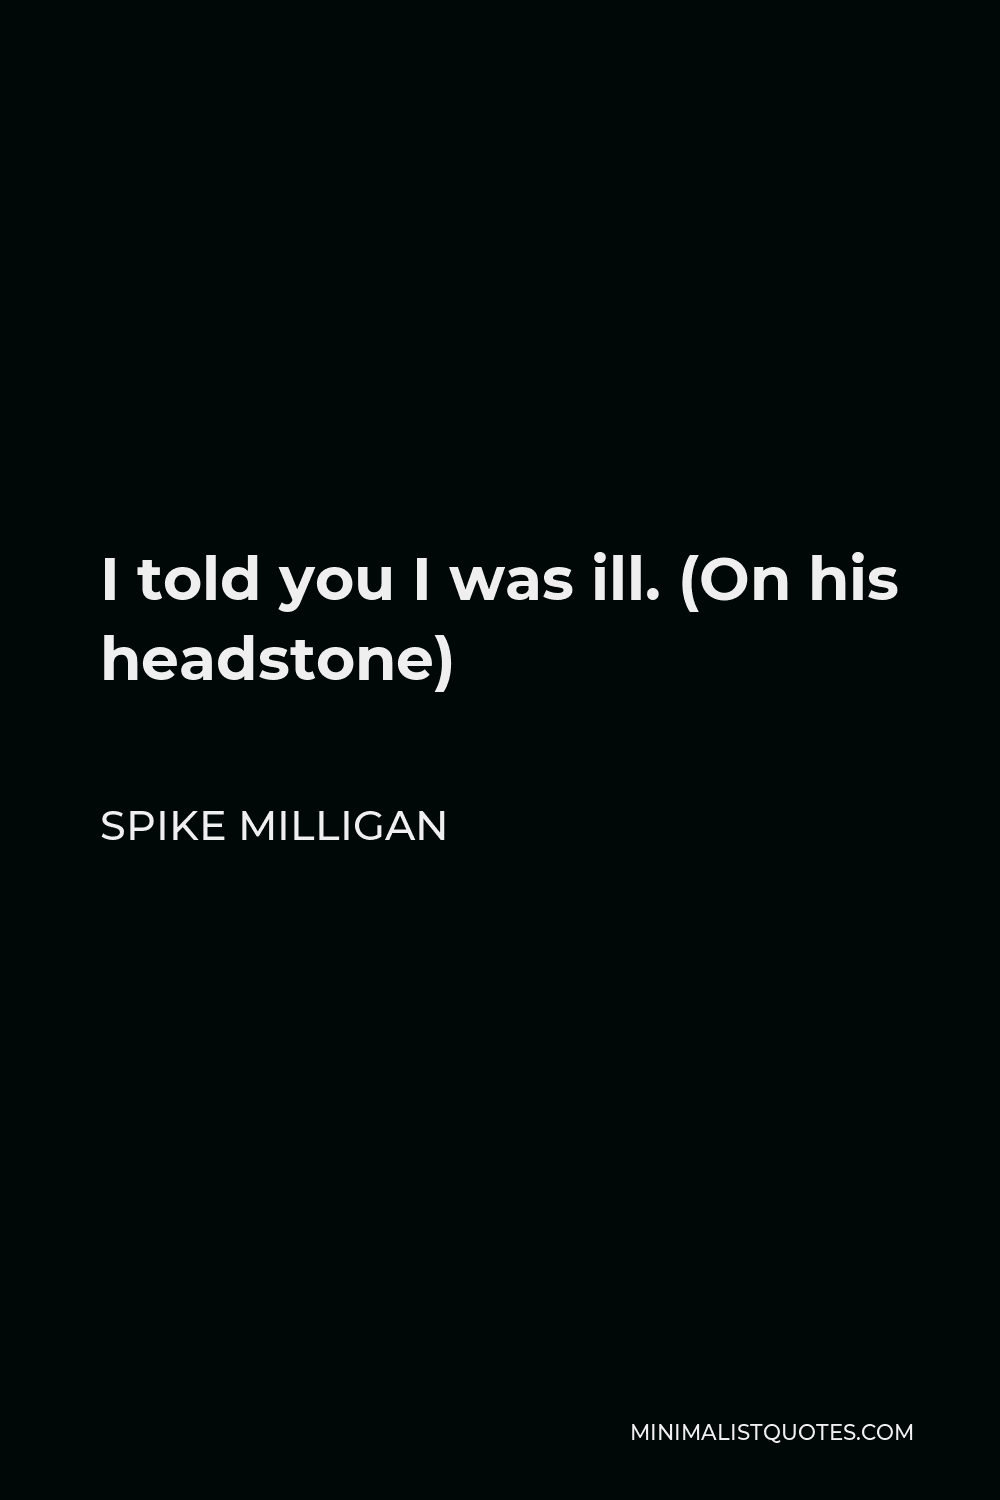 Spike Milligan Quote - I told you I was ill. (On his headstone)